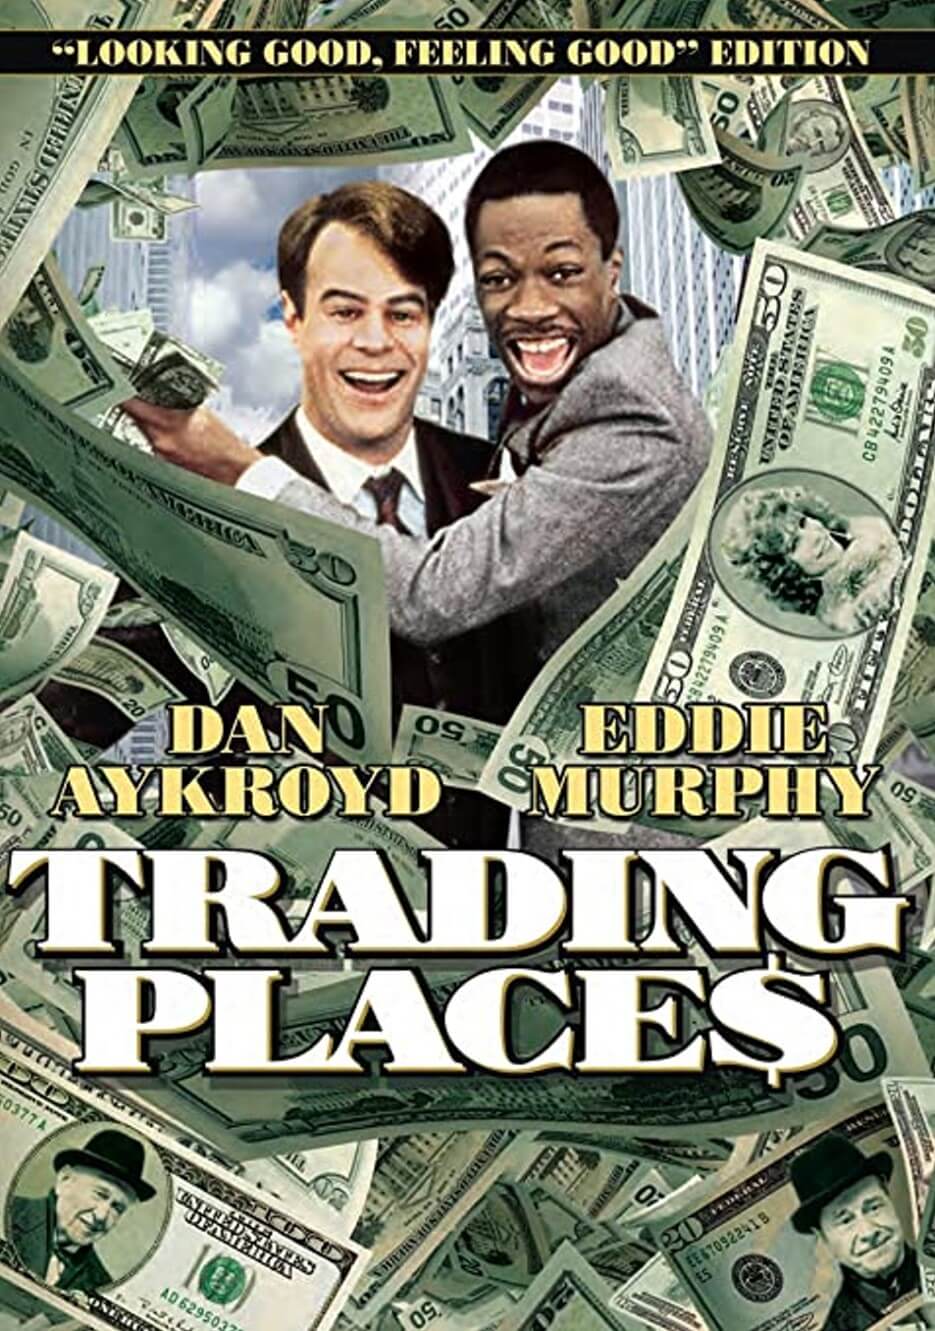 Promotional poster for the movie Trading Places